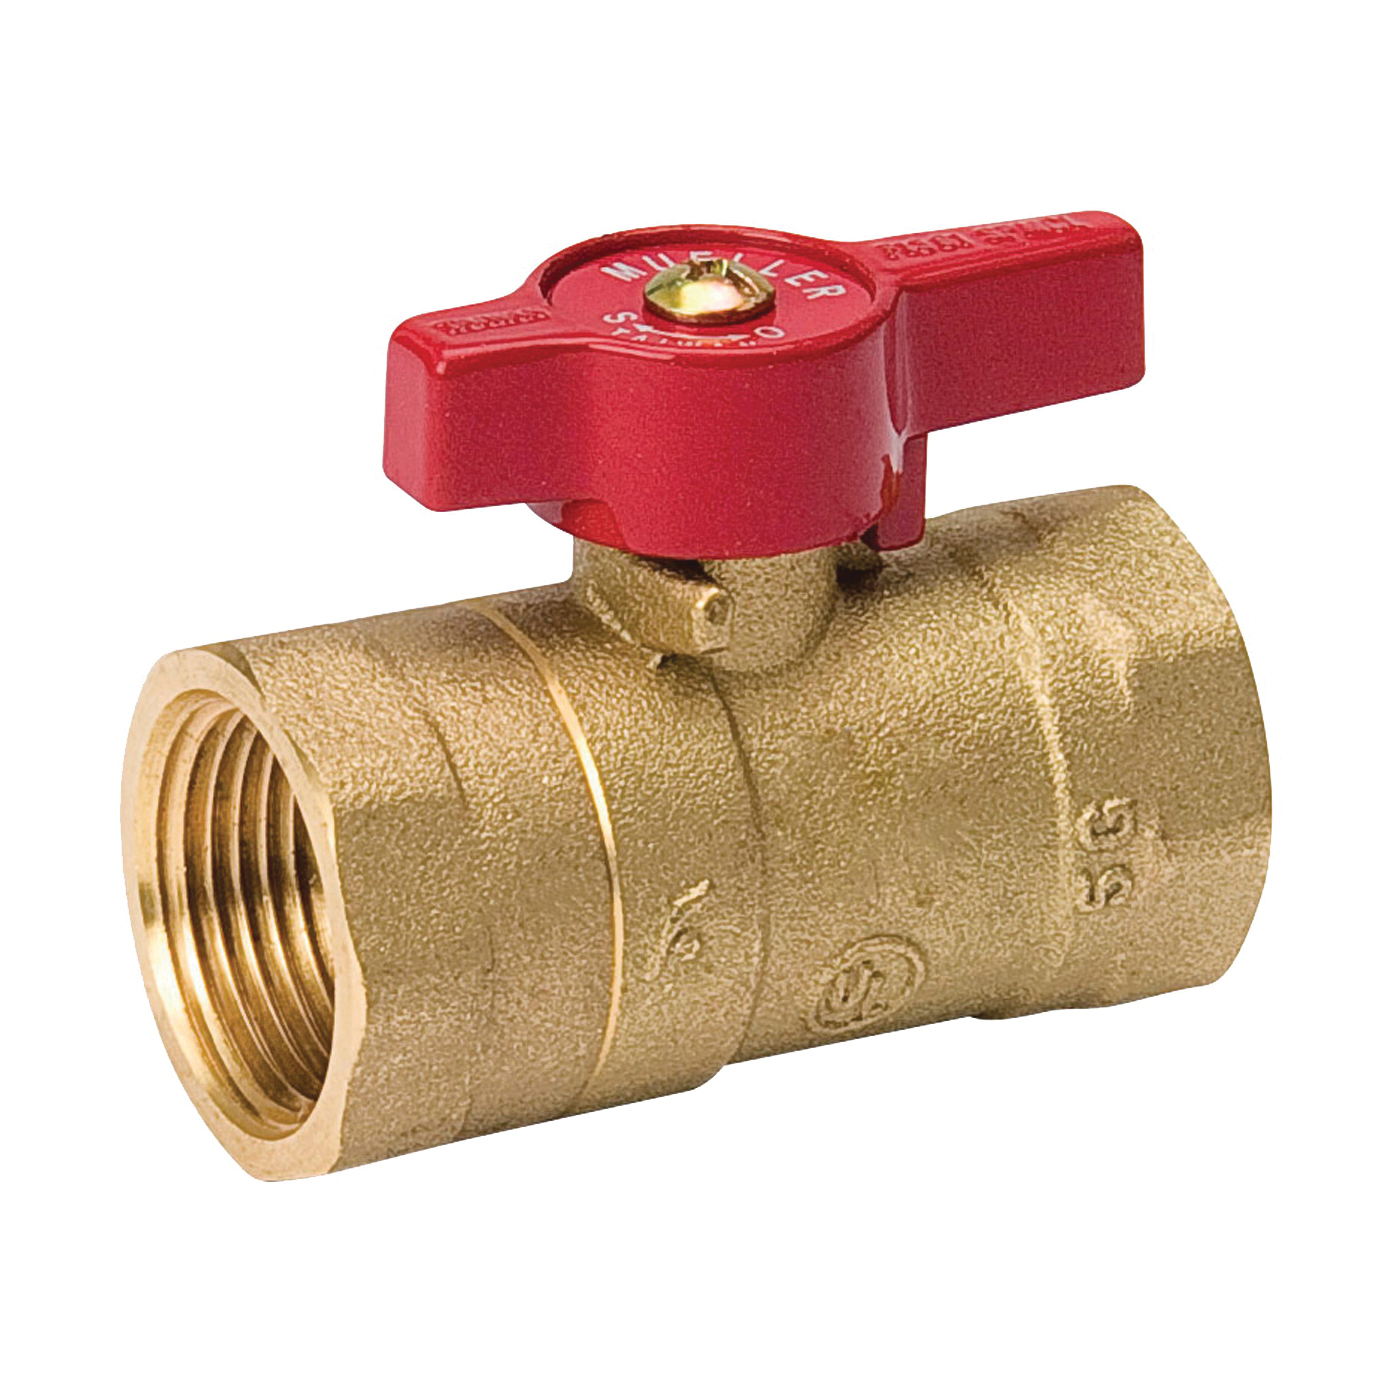 ProLine Series 110-224HC Gas Ball Valve, 3/4 in Connection, FPT, 200 psi Pressure, Manual Actuator, Brass Body